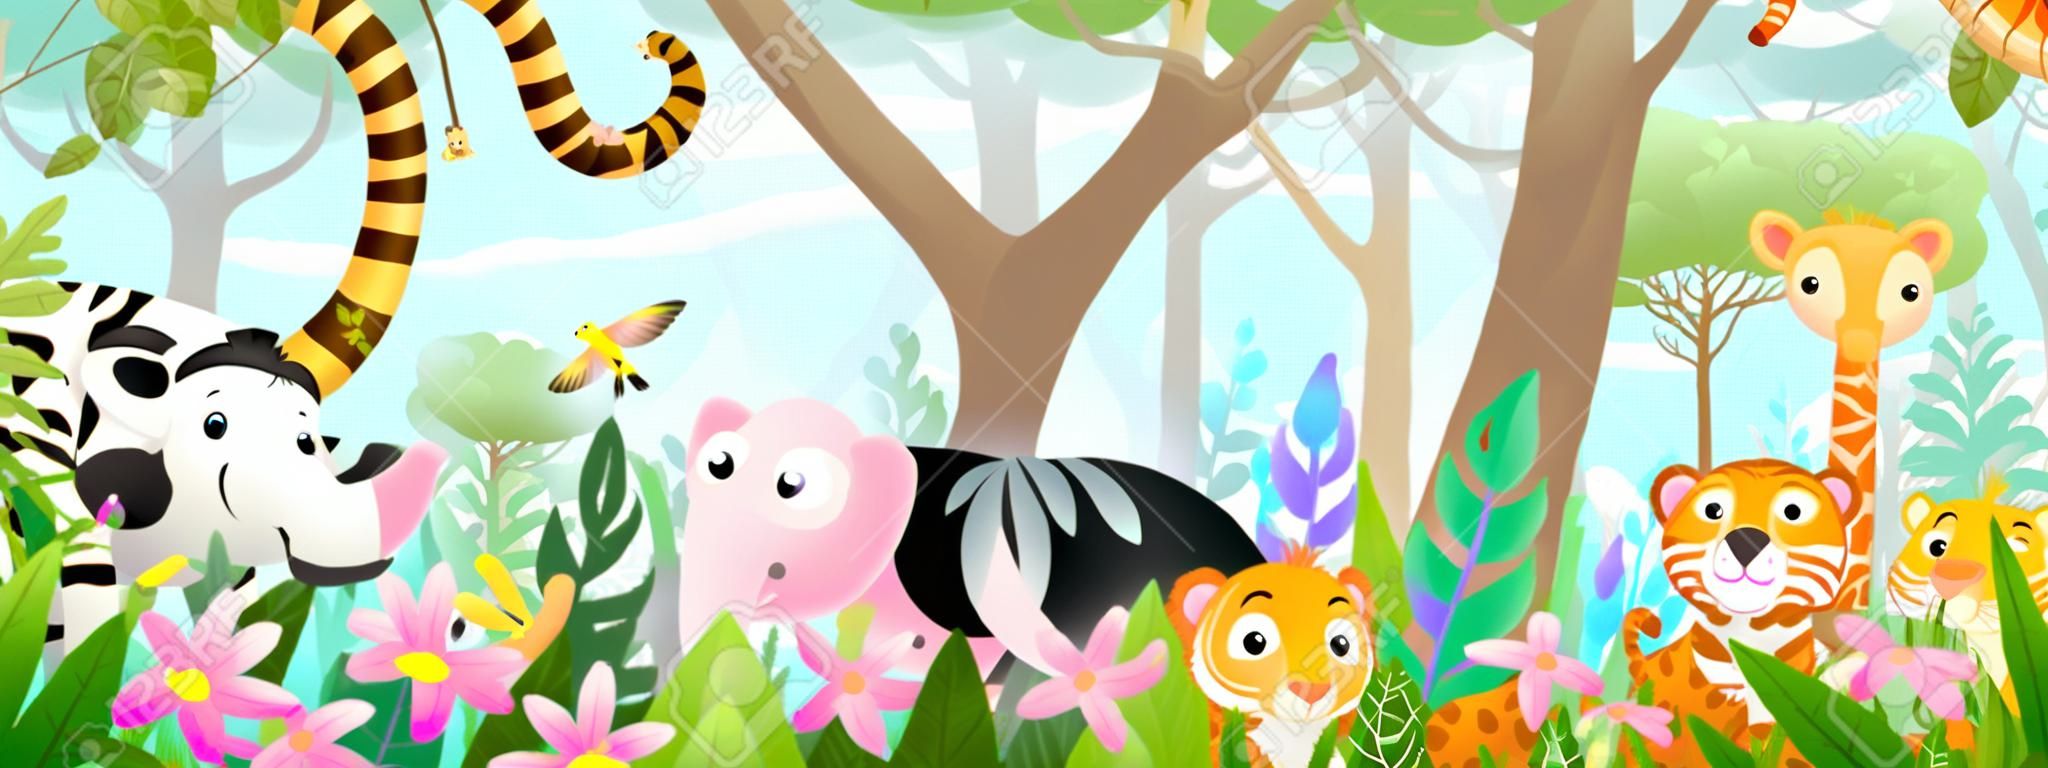 Kids animals in jungle cute friends in the wild tropical forest. Many adorable safari or zoo animals in nature. Horizontal panorama for kids and children, vector art illustration.